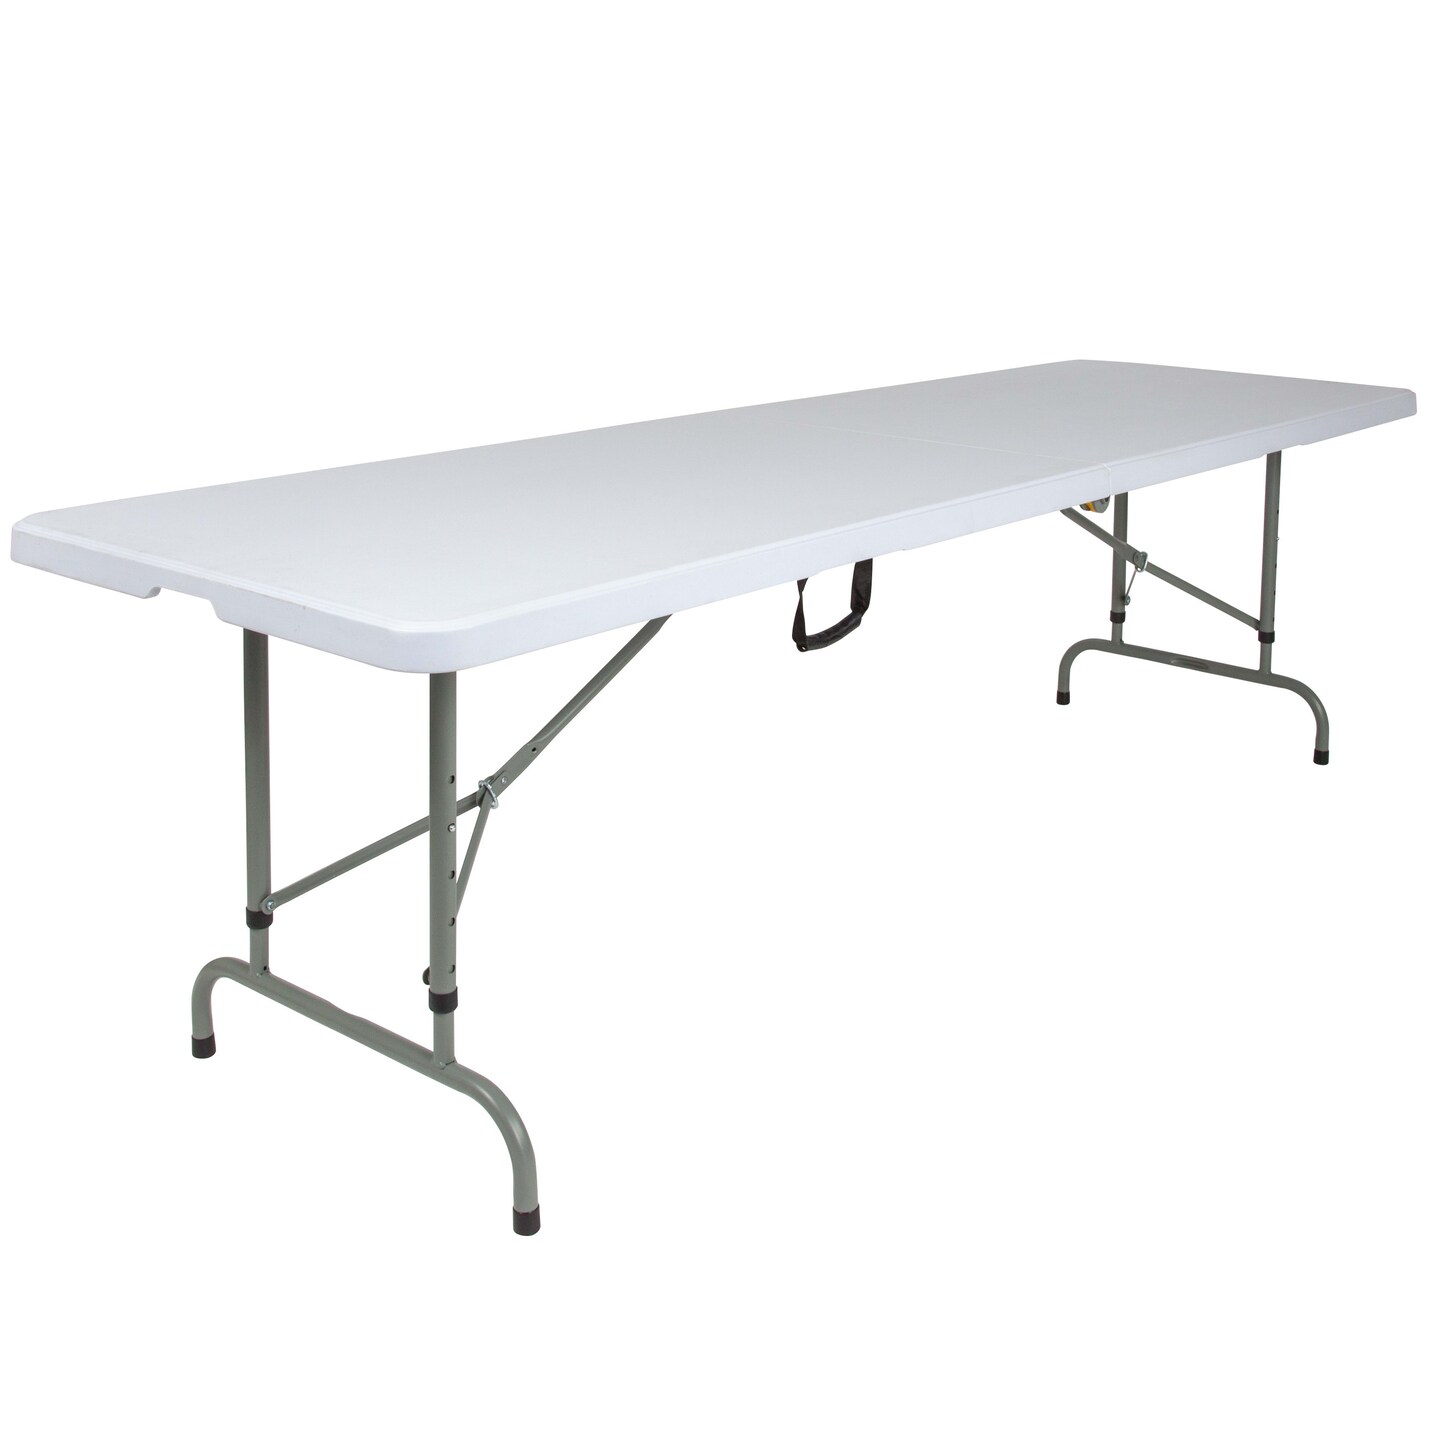 Emma and Oliver 8-Foot Height Adjustable Bi-Fold Plastic Banquet and Event Folding Table with Carrying Handle